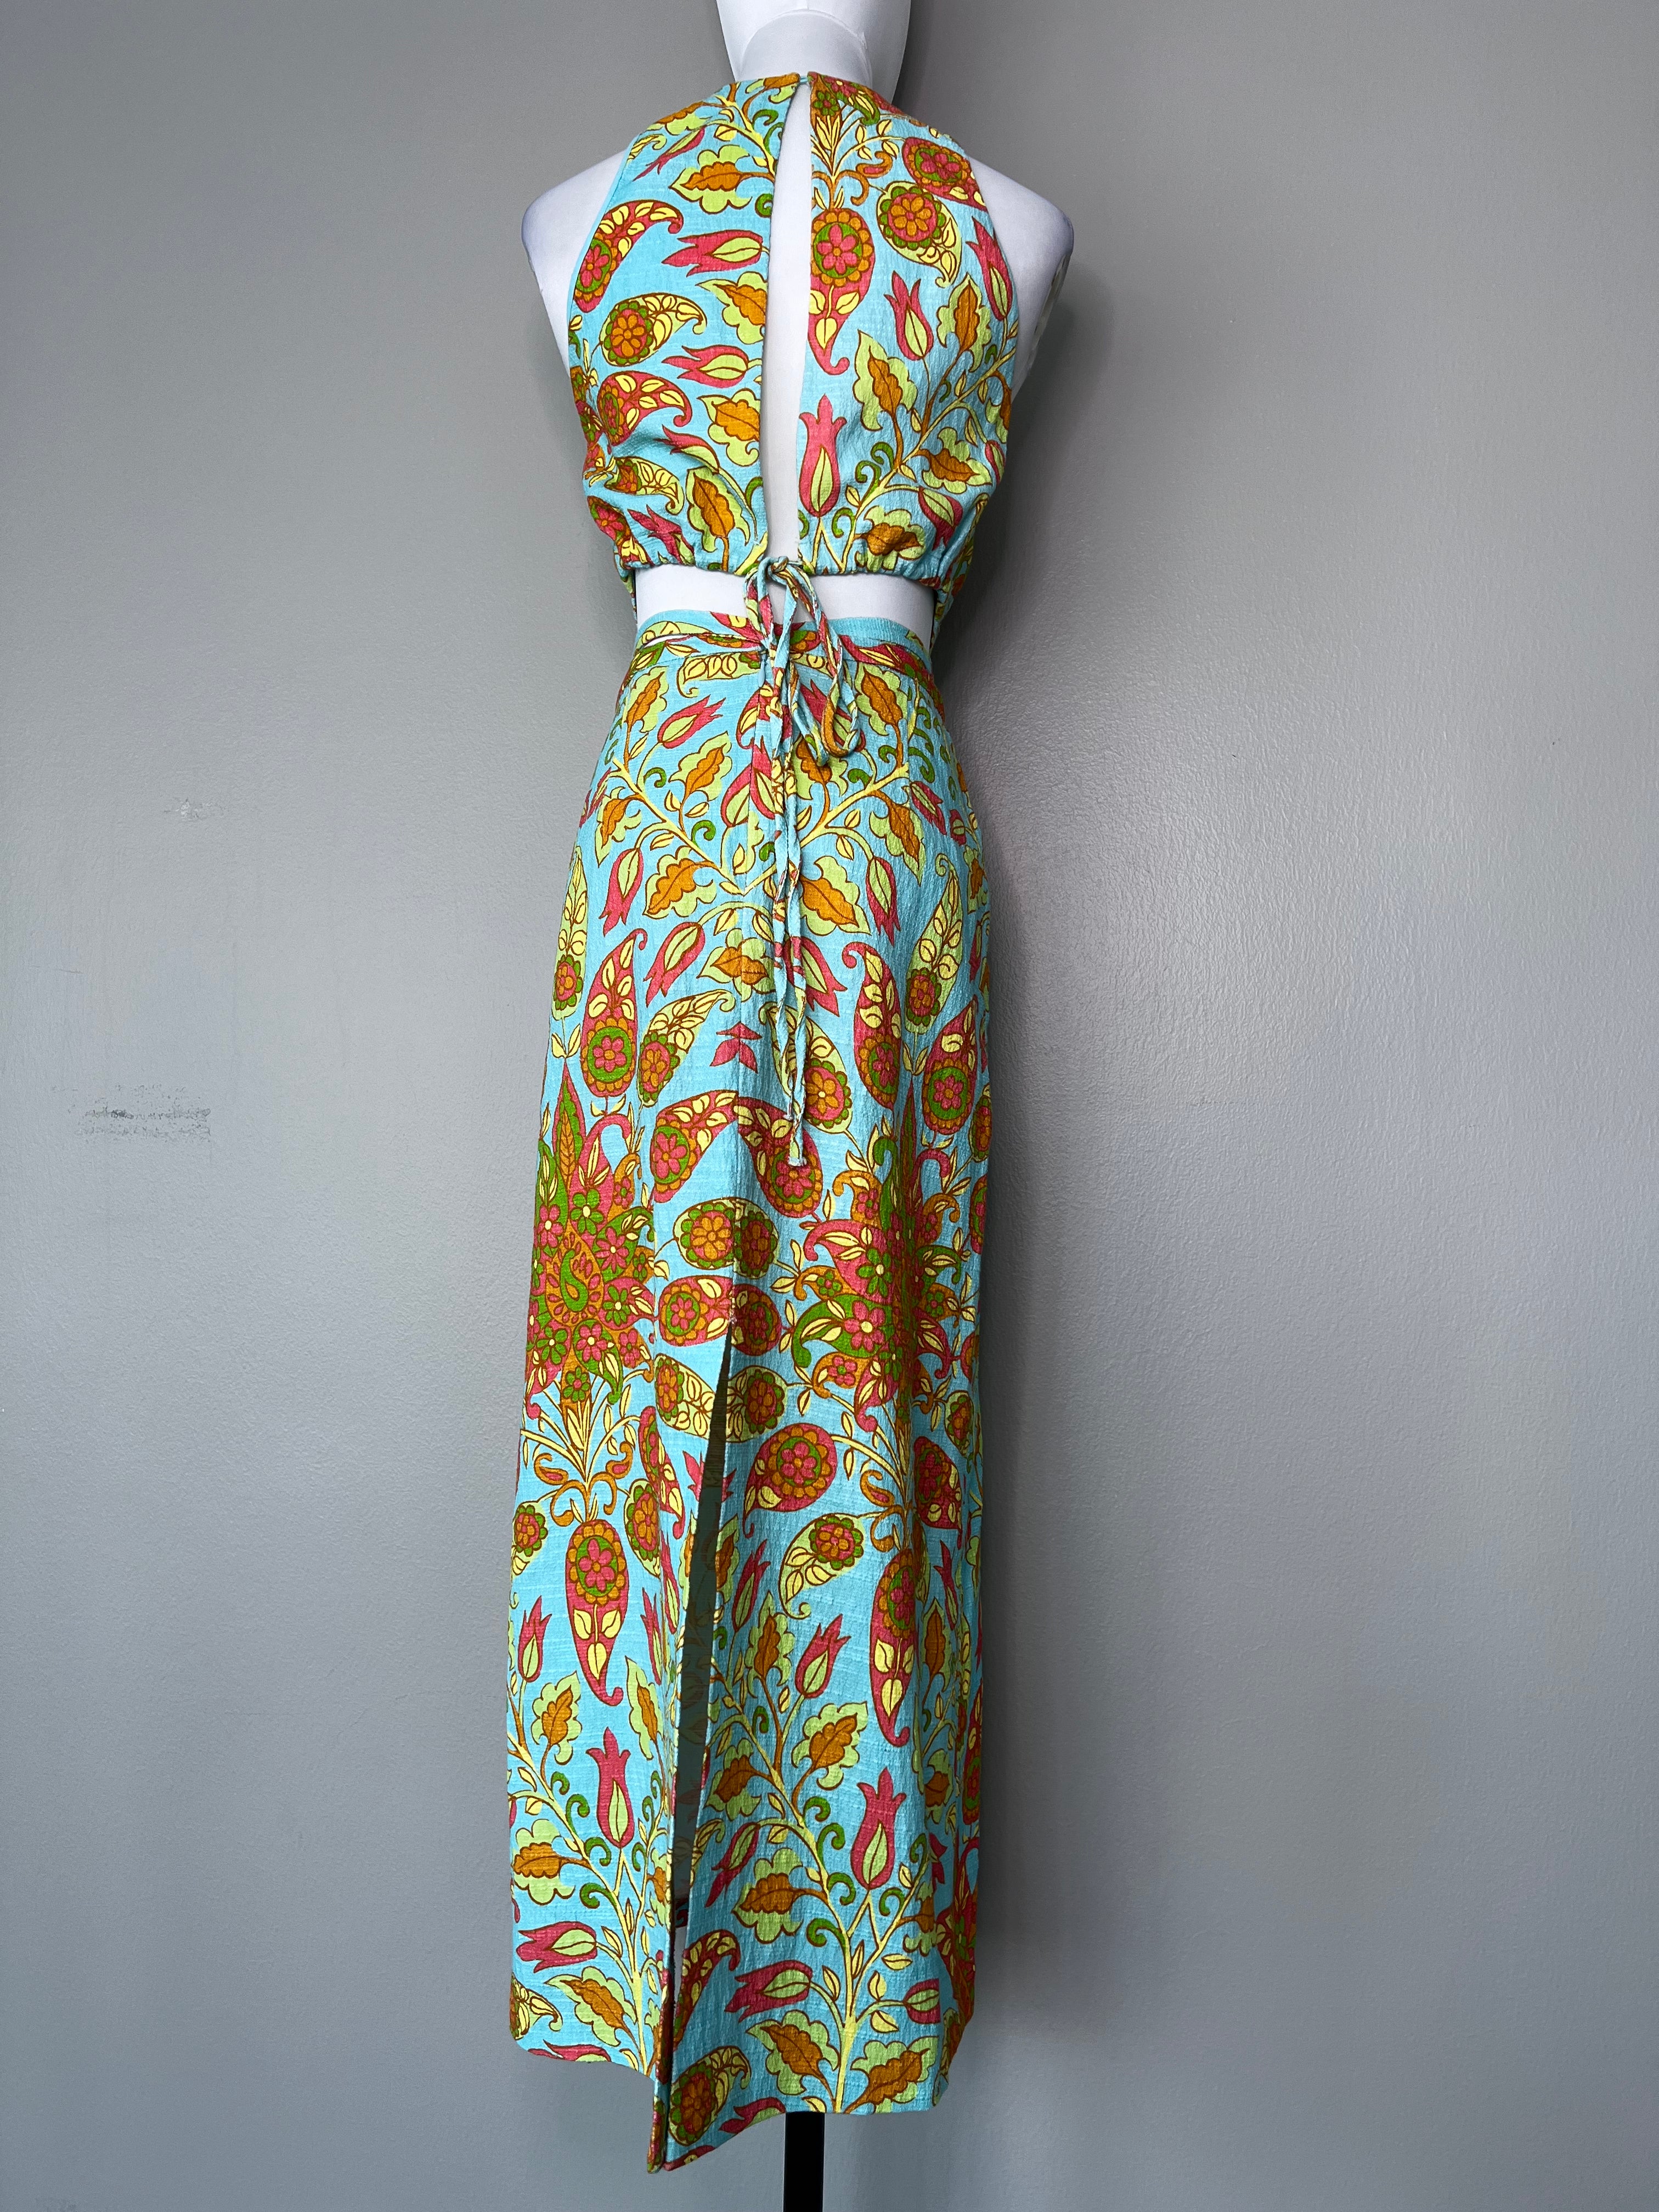 A set of long midi hippy 1960's floral paisley Turquoise Skirt with crop top backless set - ZARA